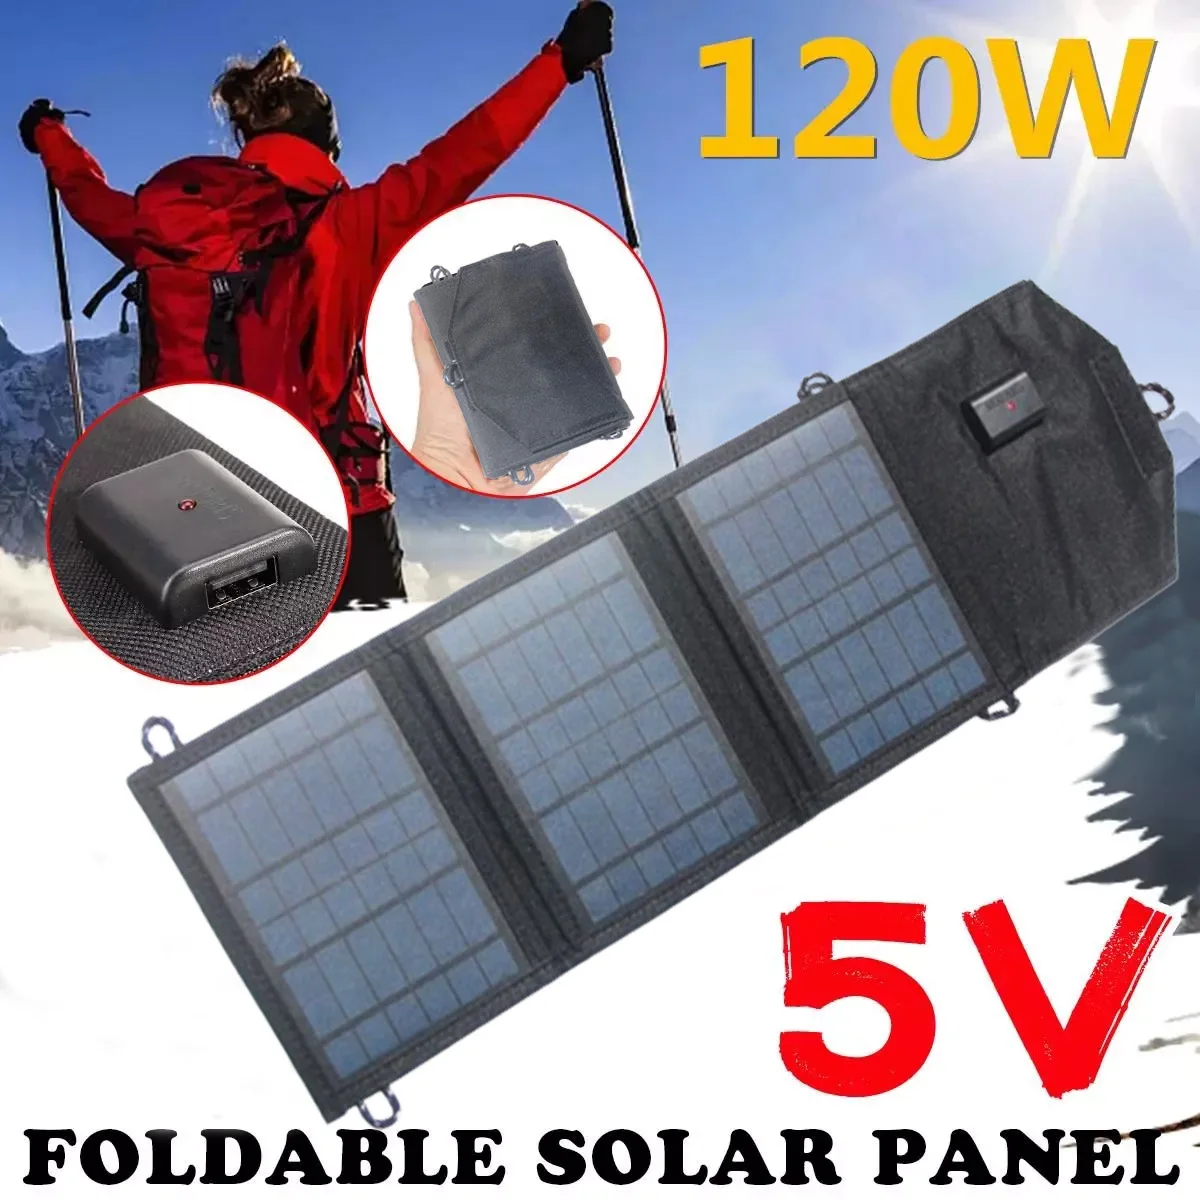 

80W/120W Portable Solar Folding Charging Pack Solar Charger Outdoor Camping Mobile Phone Power Bank 5V USB Emergency Charger